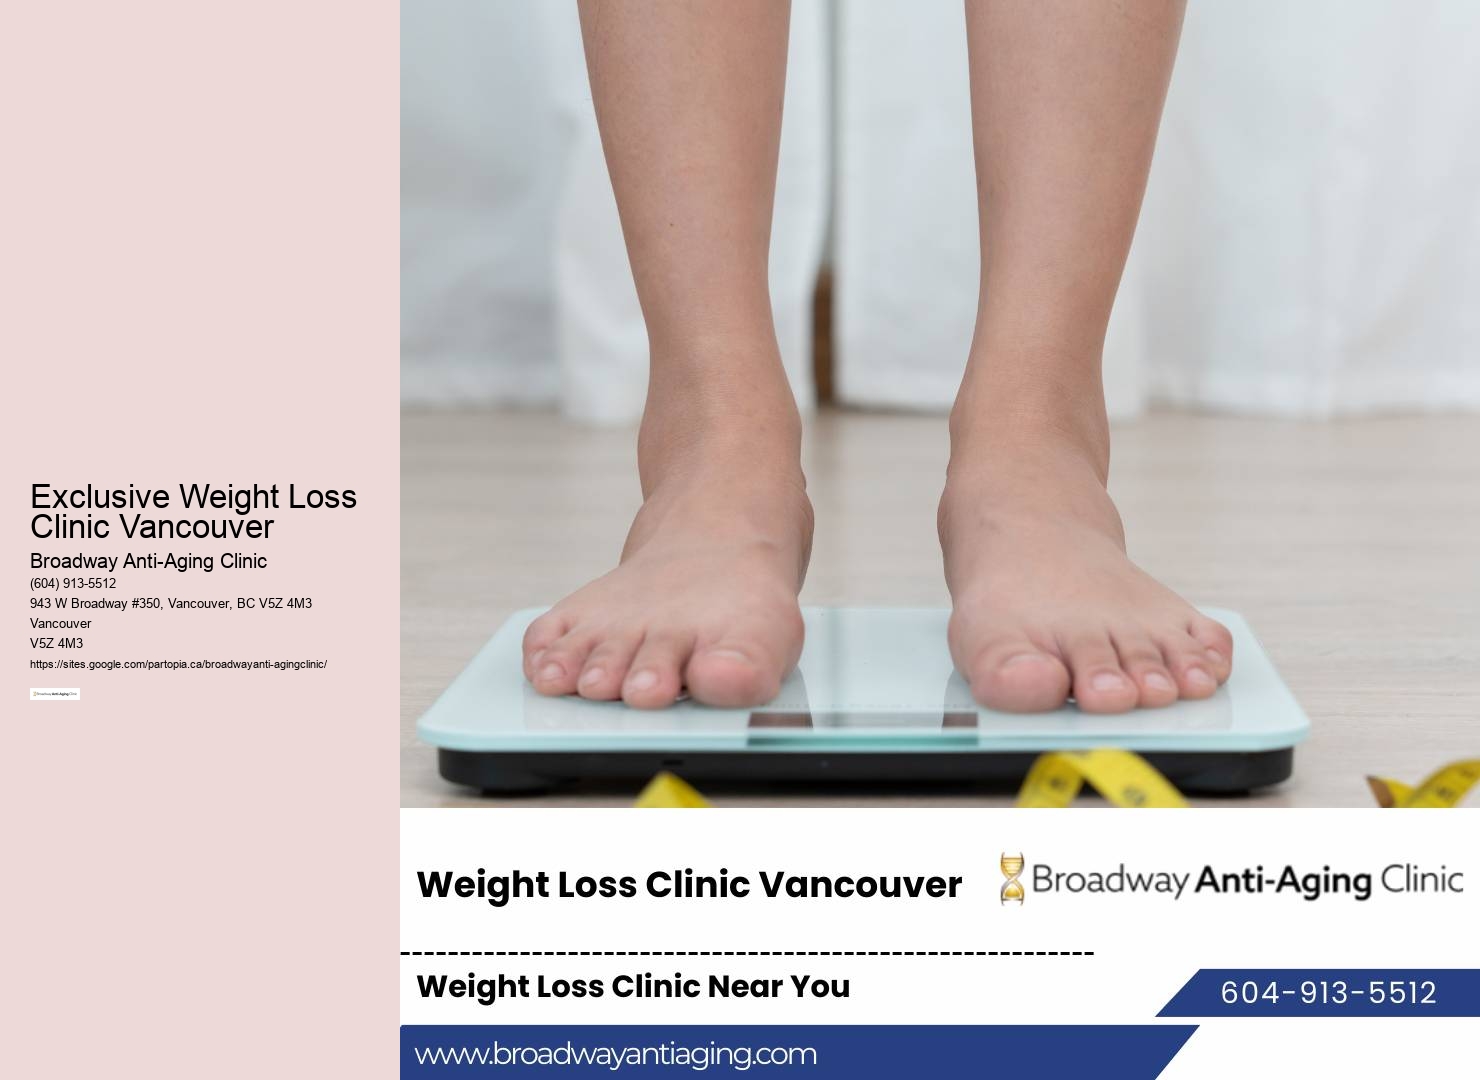 Nearby Weight Loss Clinic Near Me